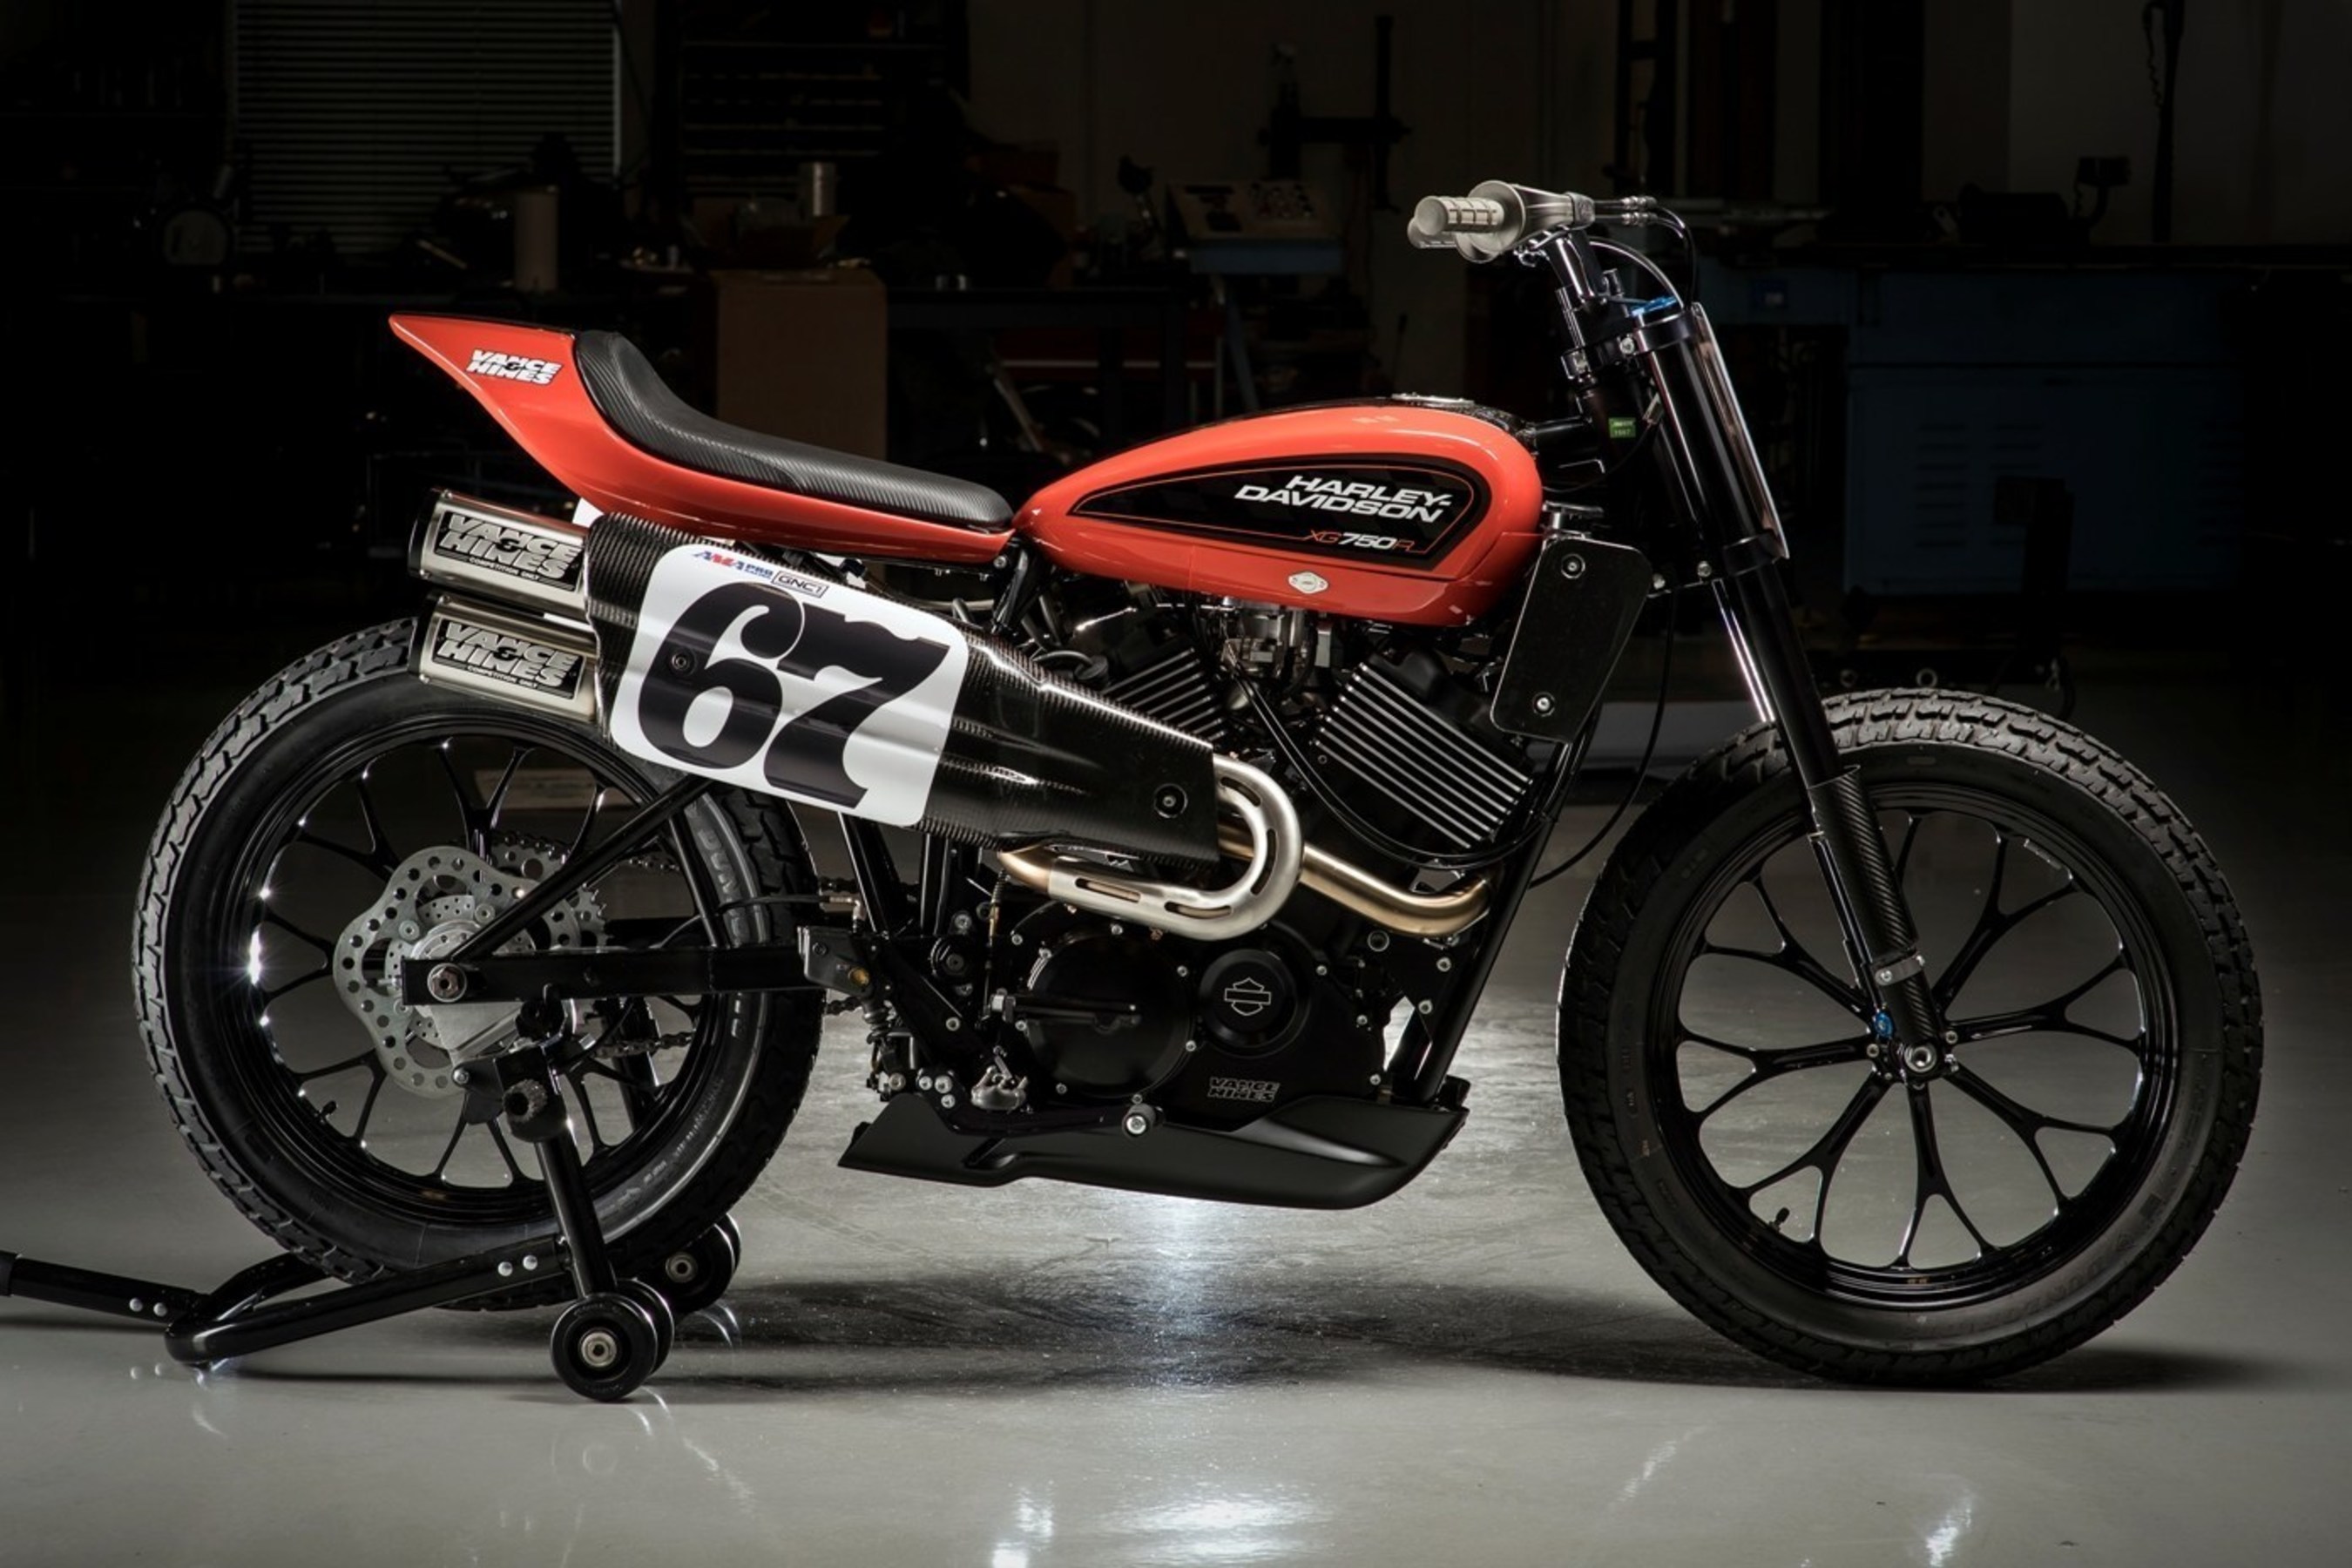 The Harley-Davidson XG750R is the first all-new flat track race bike in 44 years that will battle the fierce, adrenaline-filled competition of dirt tracks across the U.S.